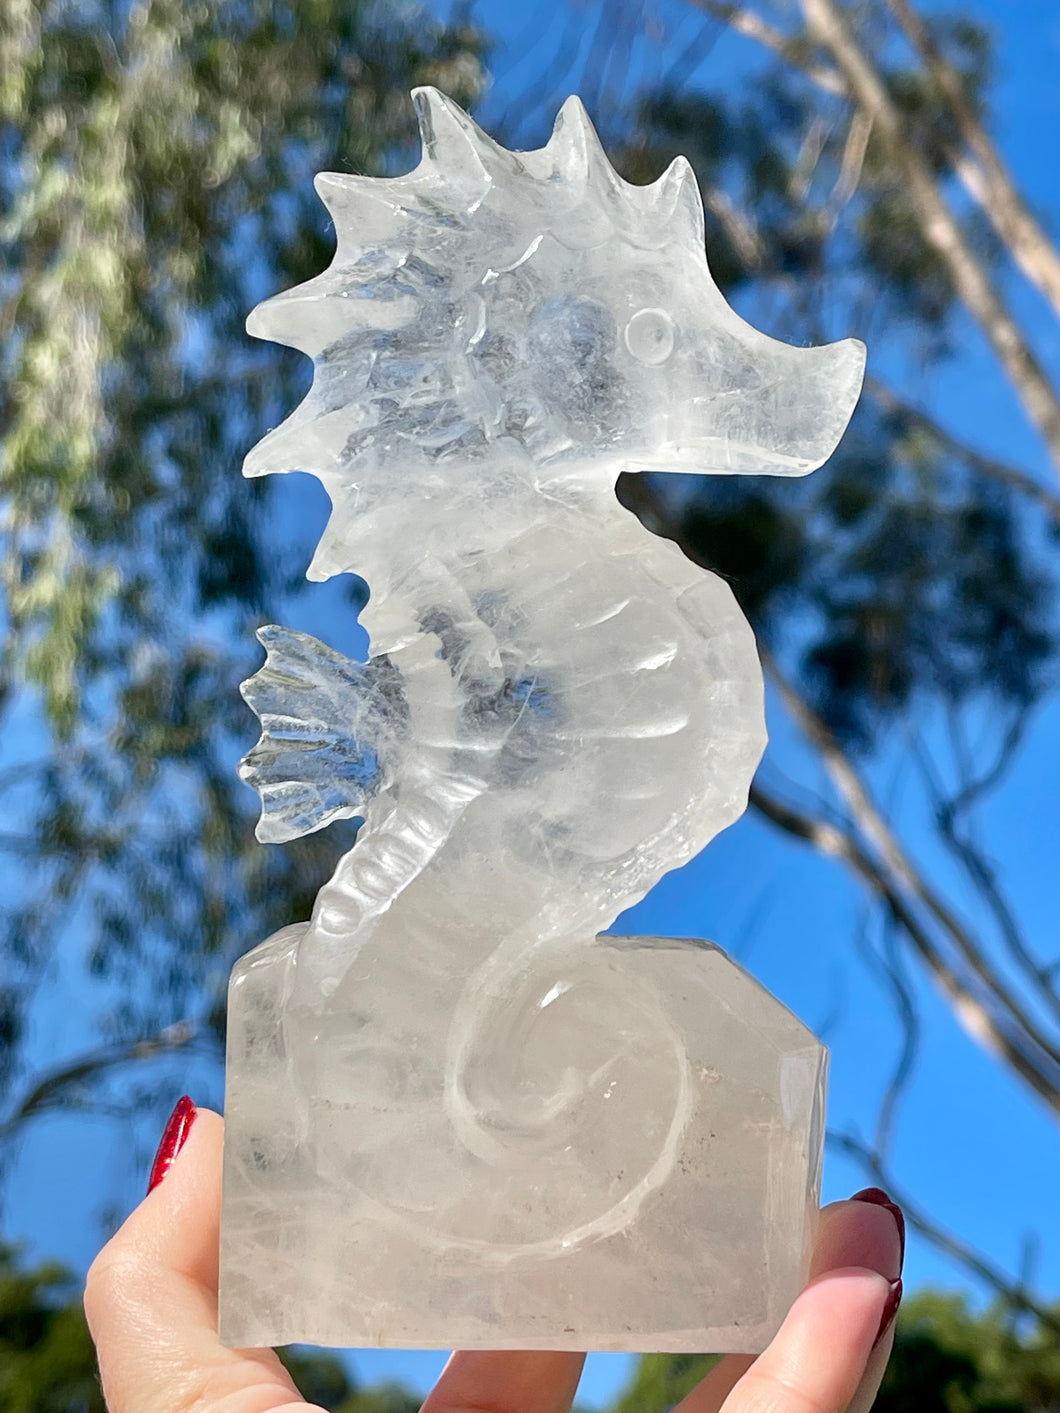 Large 6” High Quality Clear Quartz Crystal Seahorse Carving #2